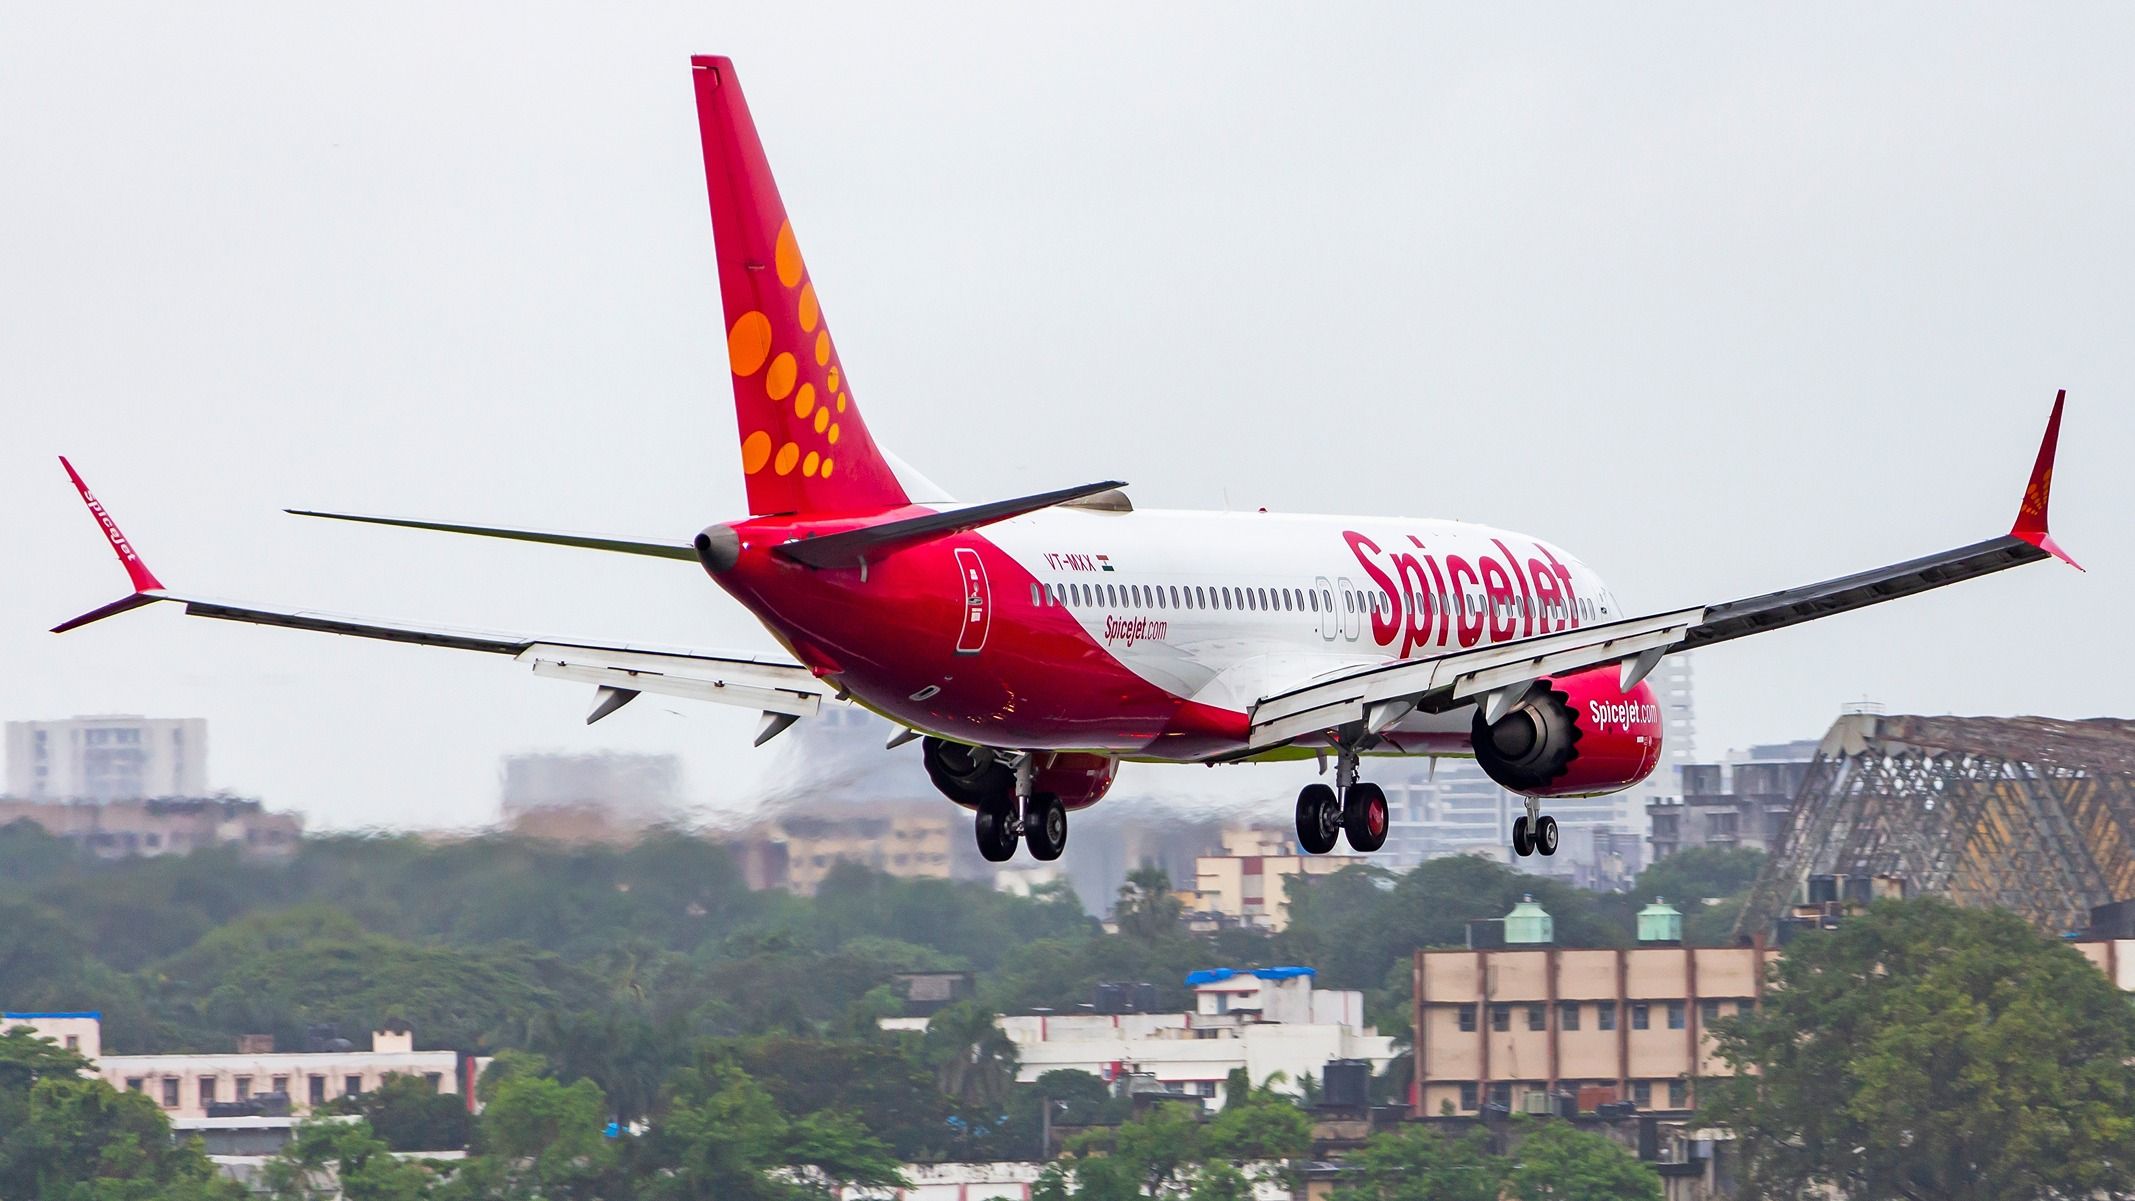 SpiceJet Boeing 737 MAX landing at an airport